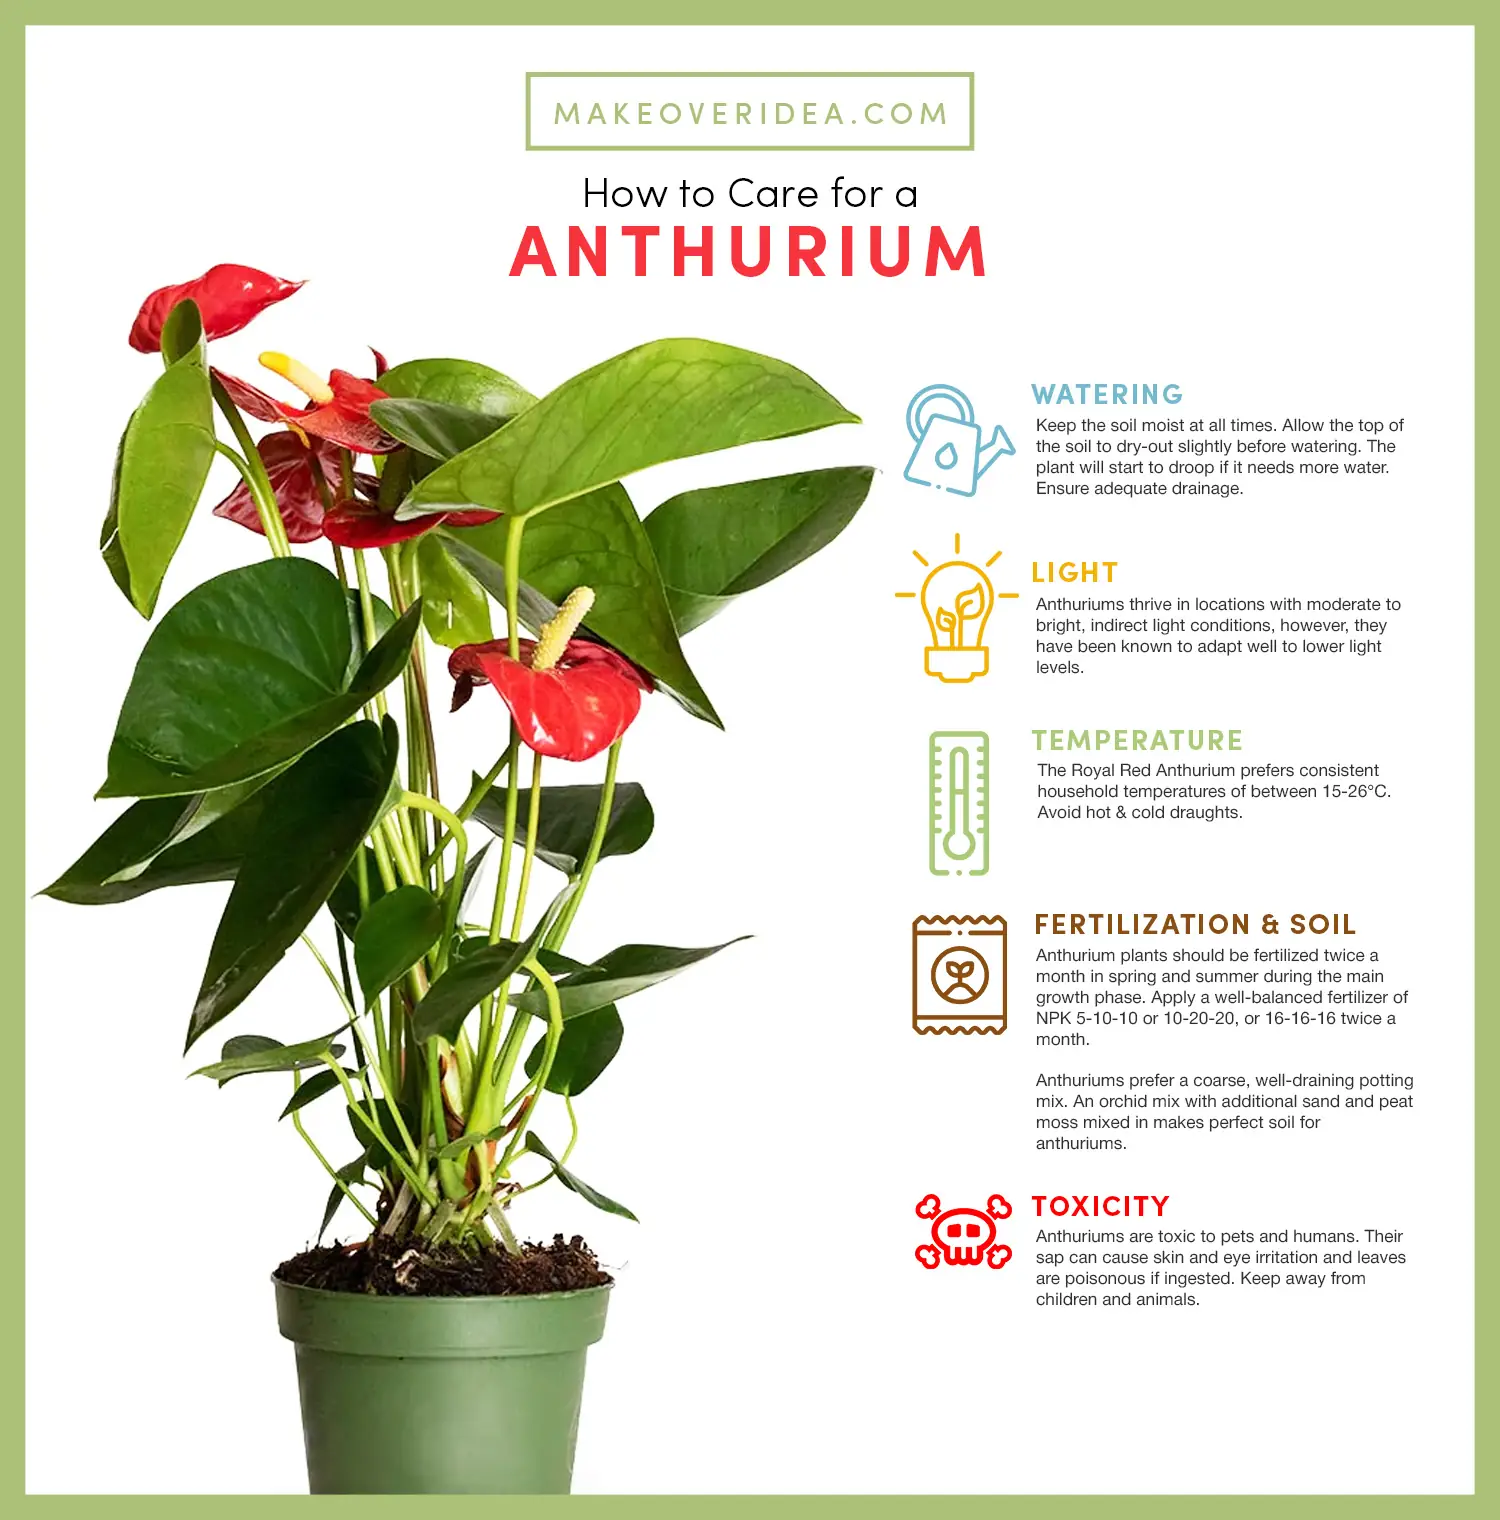 how to care for Anthurium chart requirements